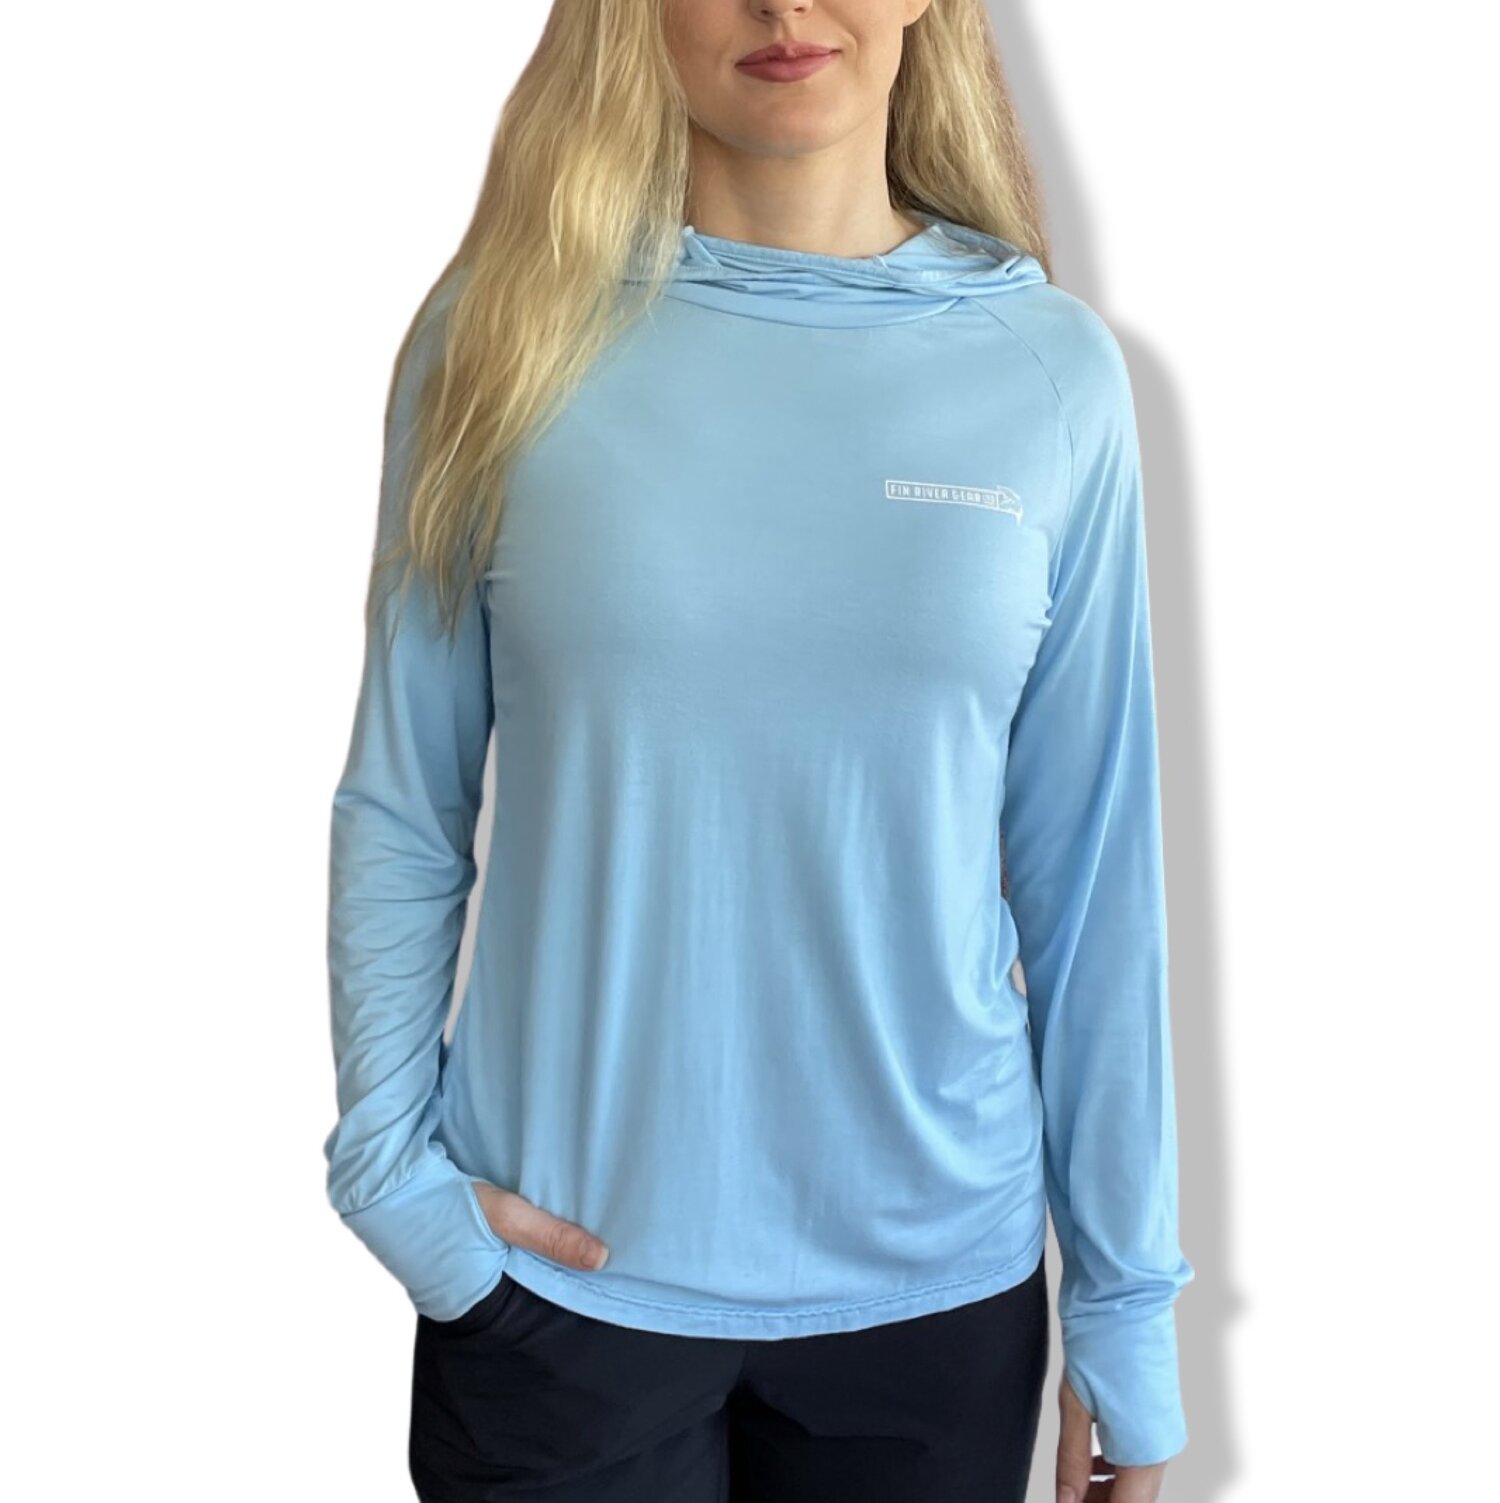 Women's Hooded Fishing Shirt with Face Mask, thumb holes